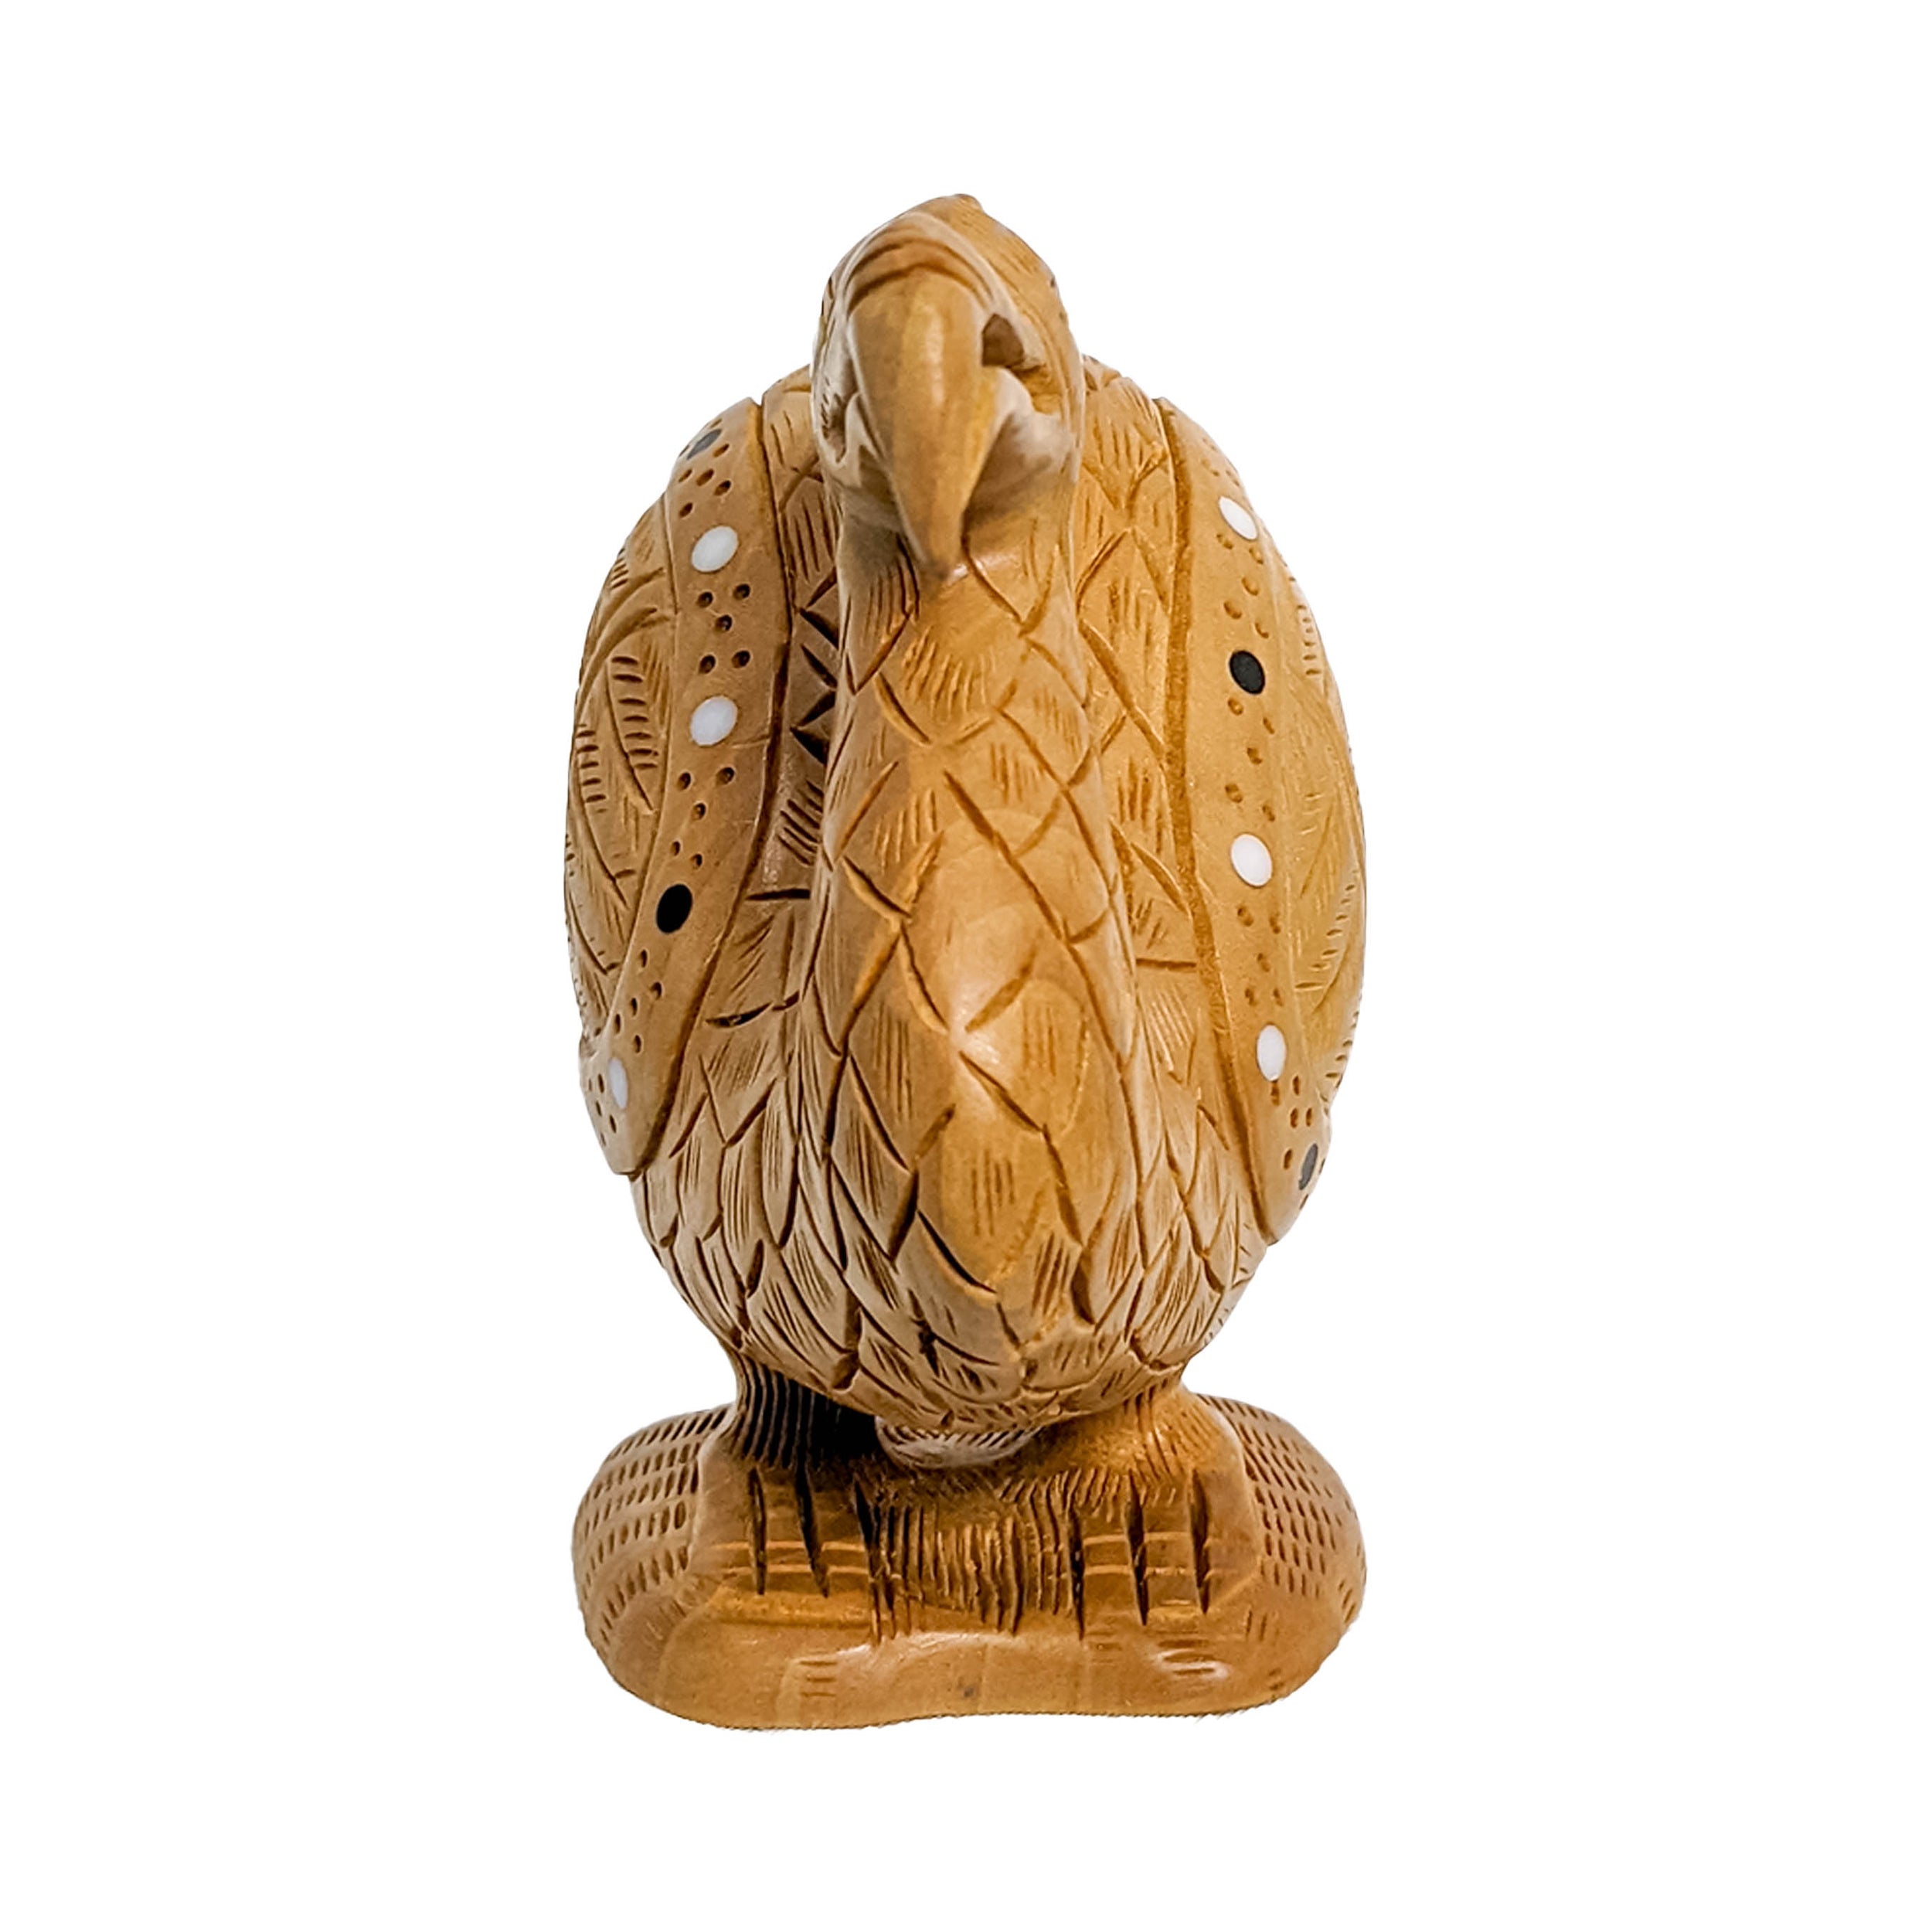 Add an Extinct Charm to Your Home Decor with Handcrafted Wooden Dodo Statue